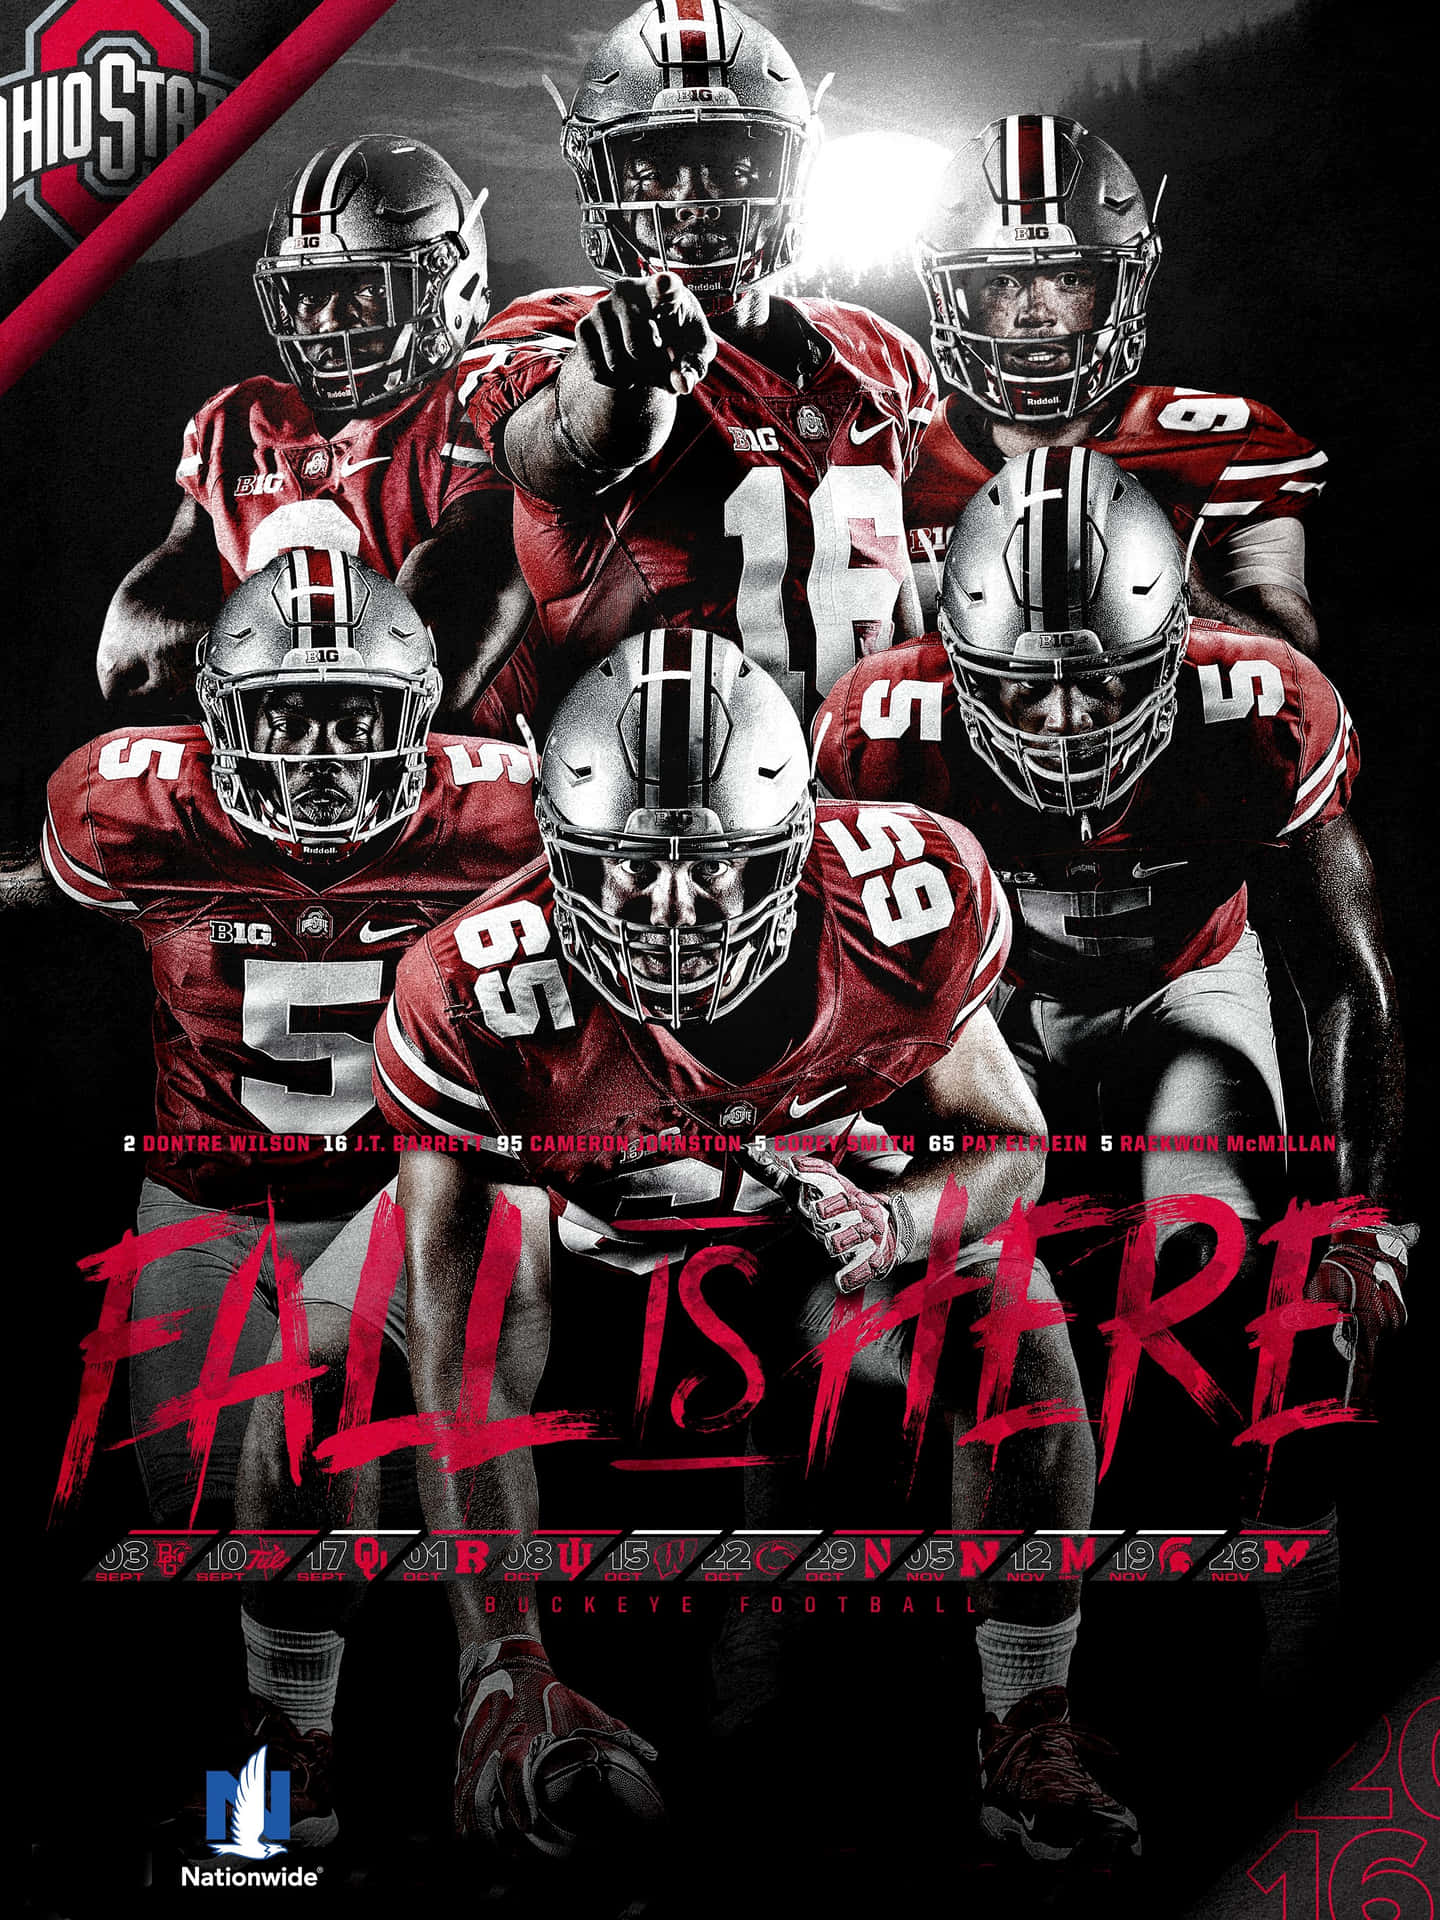 Ohiostate Football Team Herbst Ist Hier Poster Wallpaper